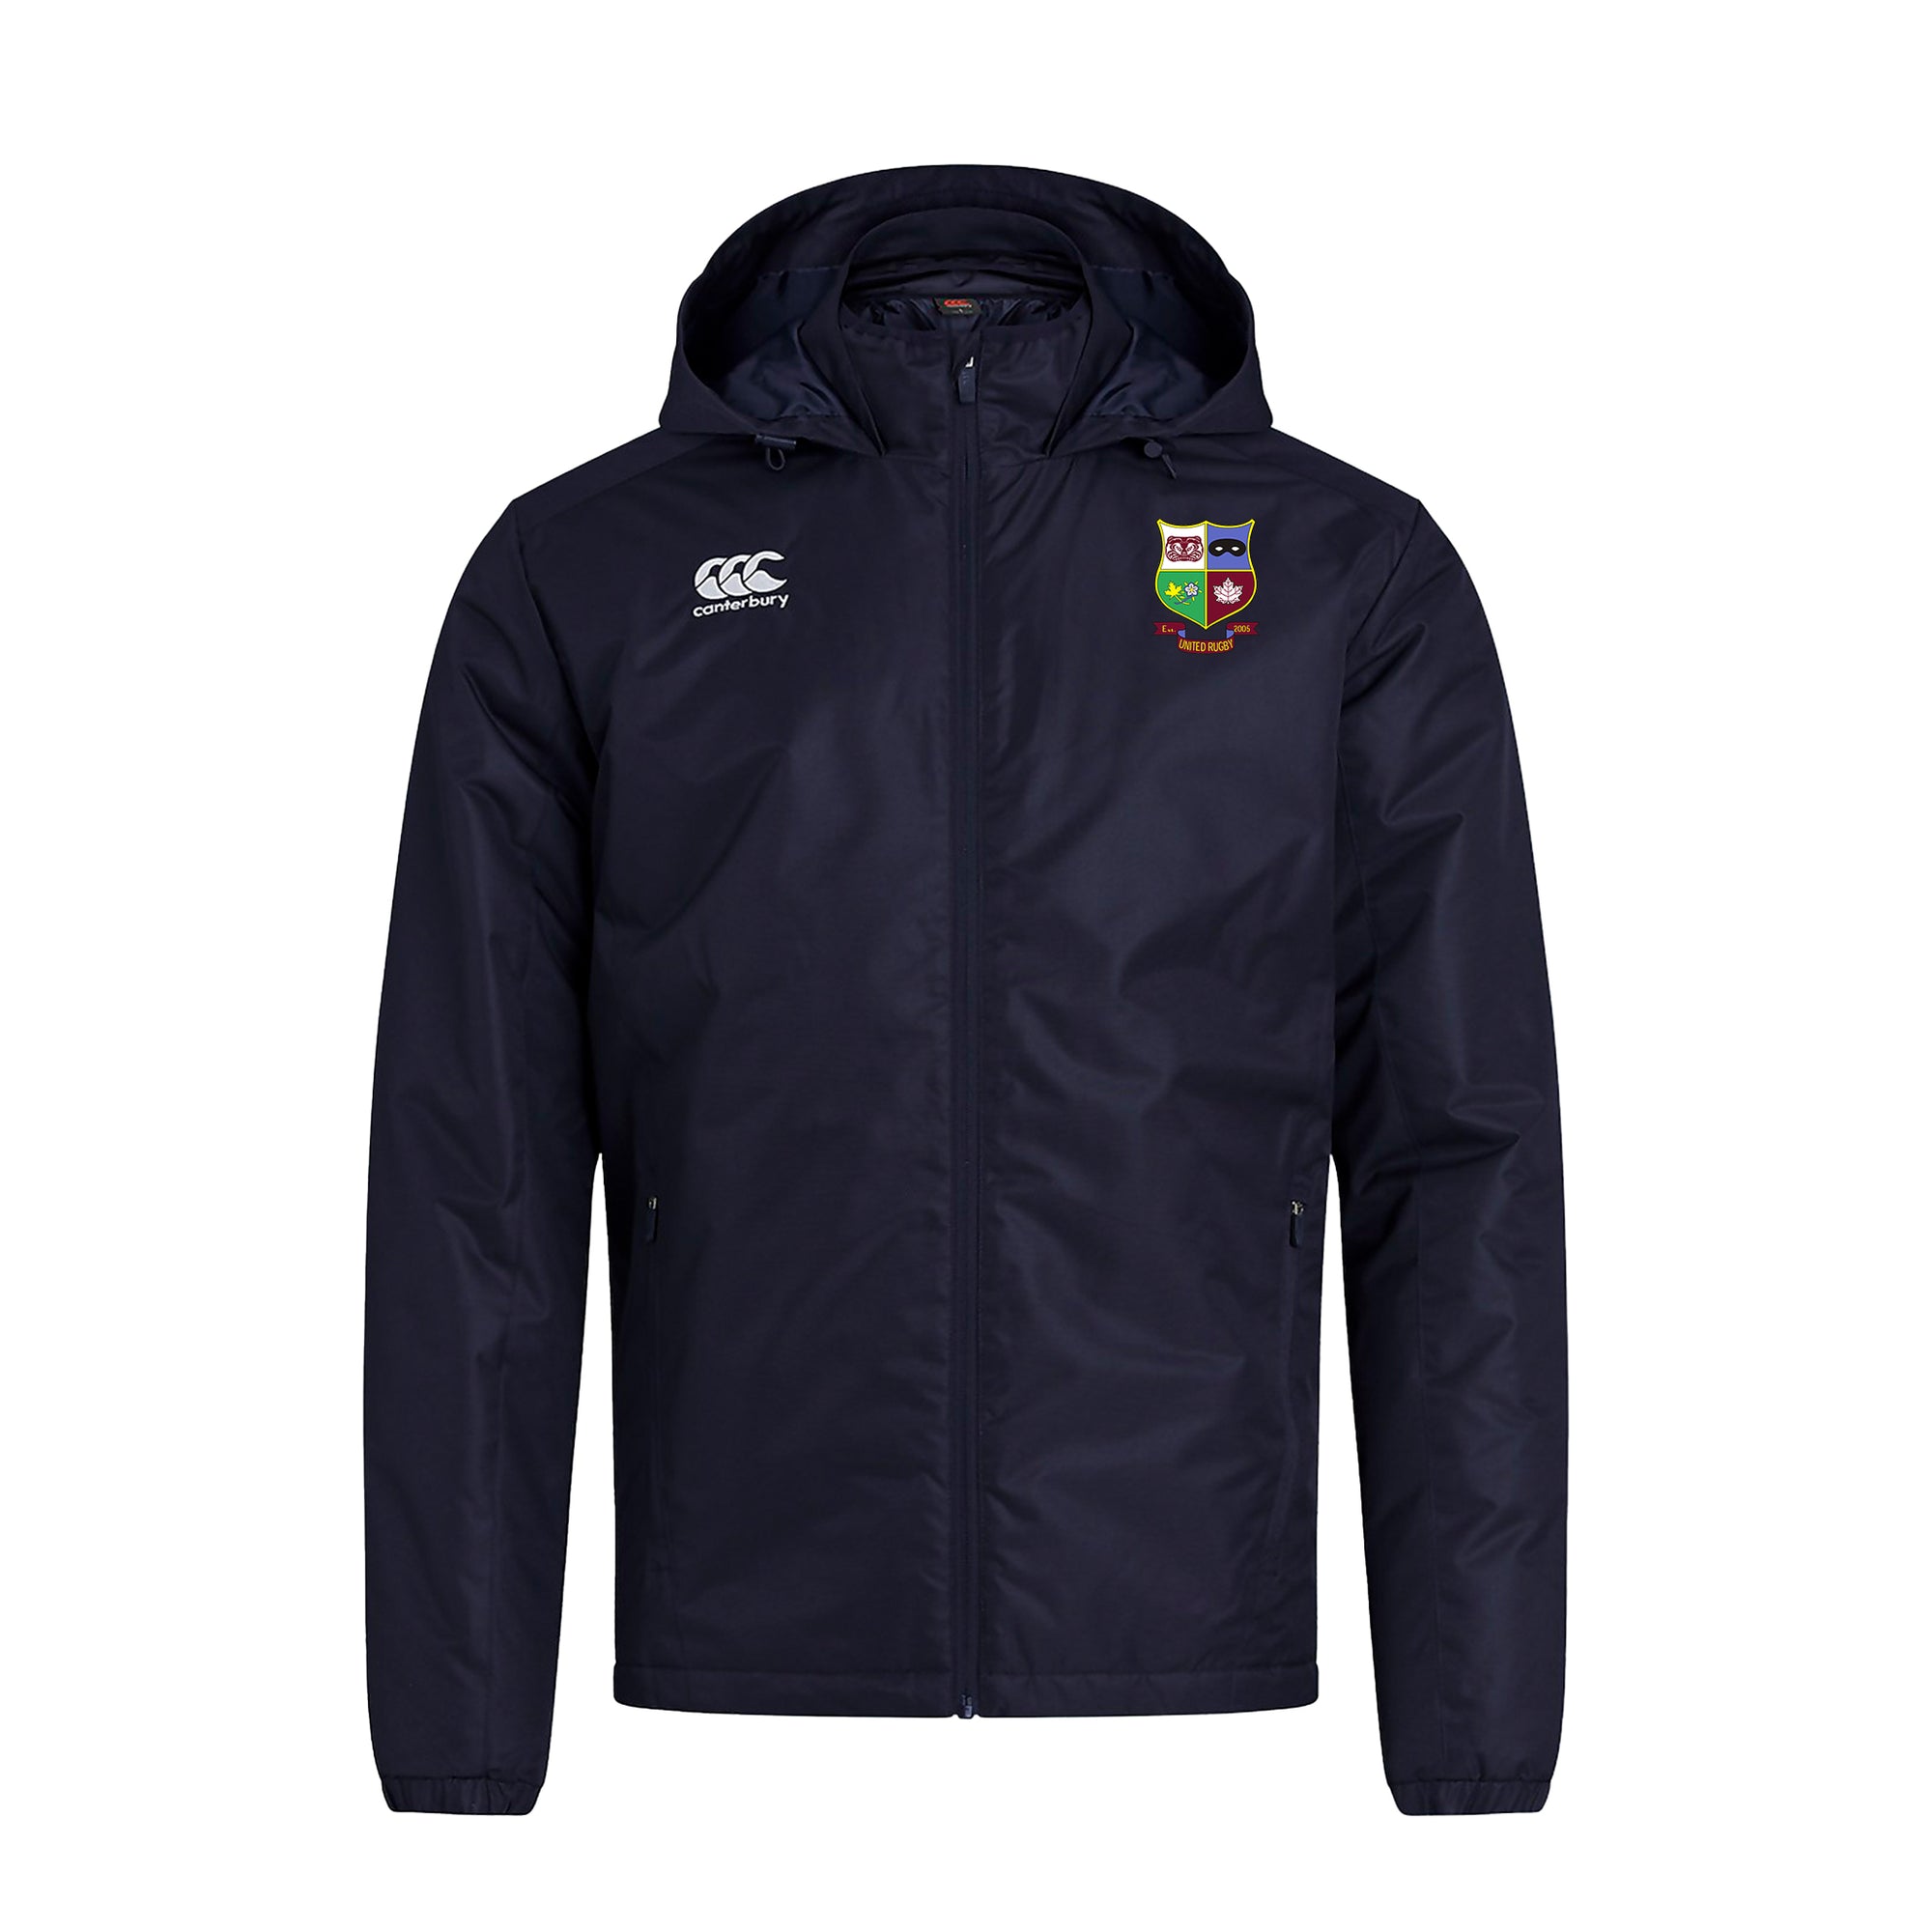 United Rugby Club Canterbury Stadium Jacket Navy Front. Canterbury logo on right and United Rugby Club Logo on left chest.